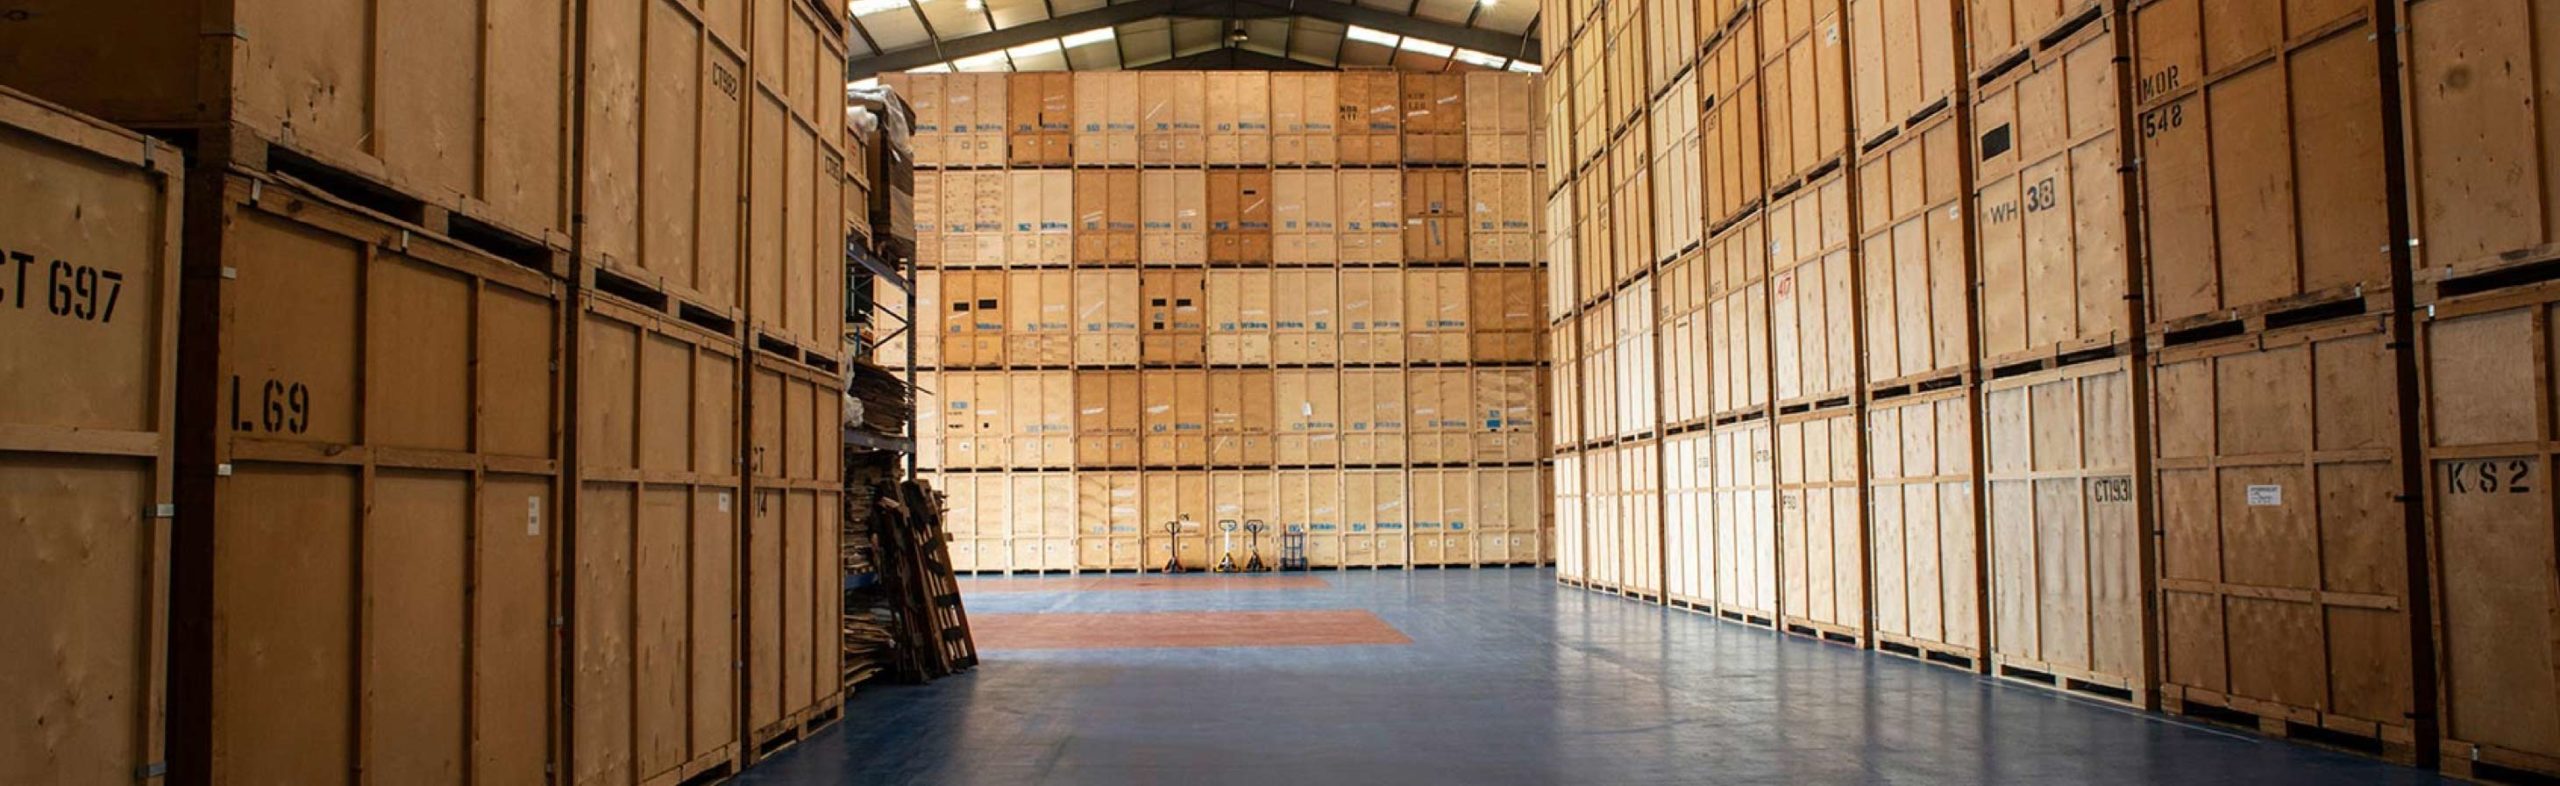 Ensure your property is shipped safely and on time